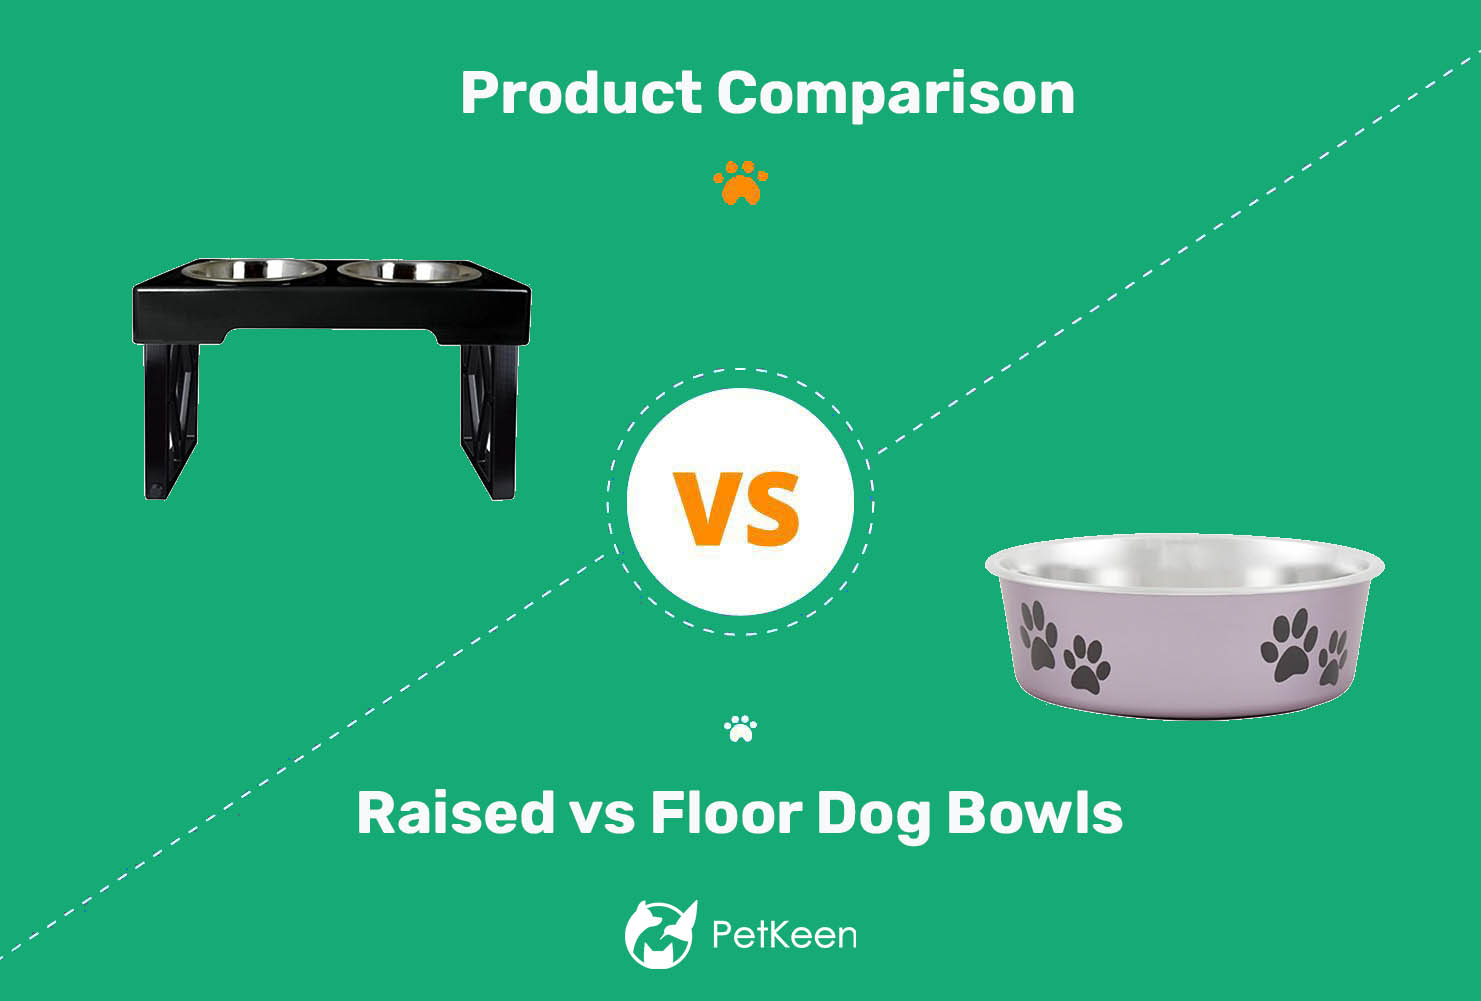 are lifted bowls safe for tiny dogs